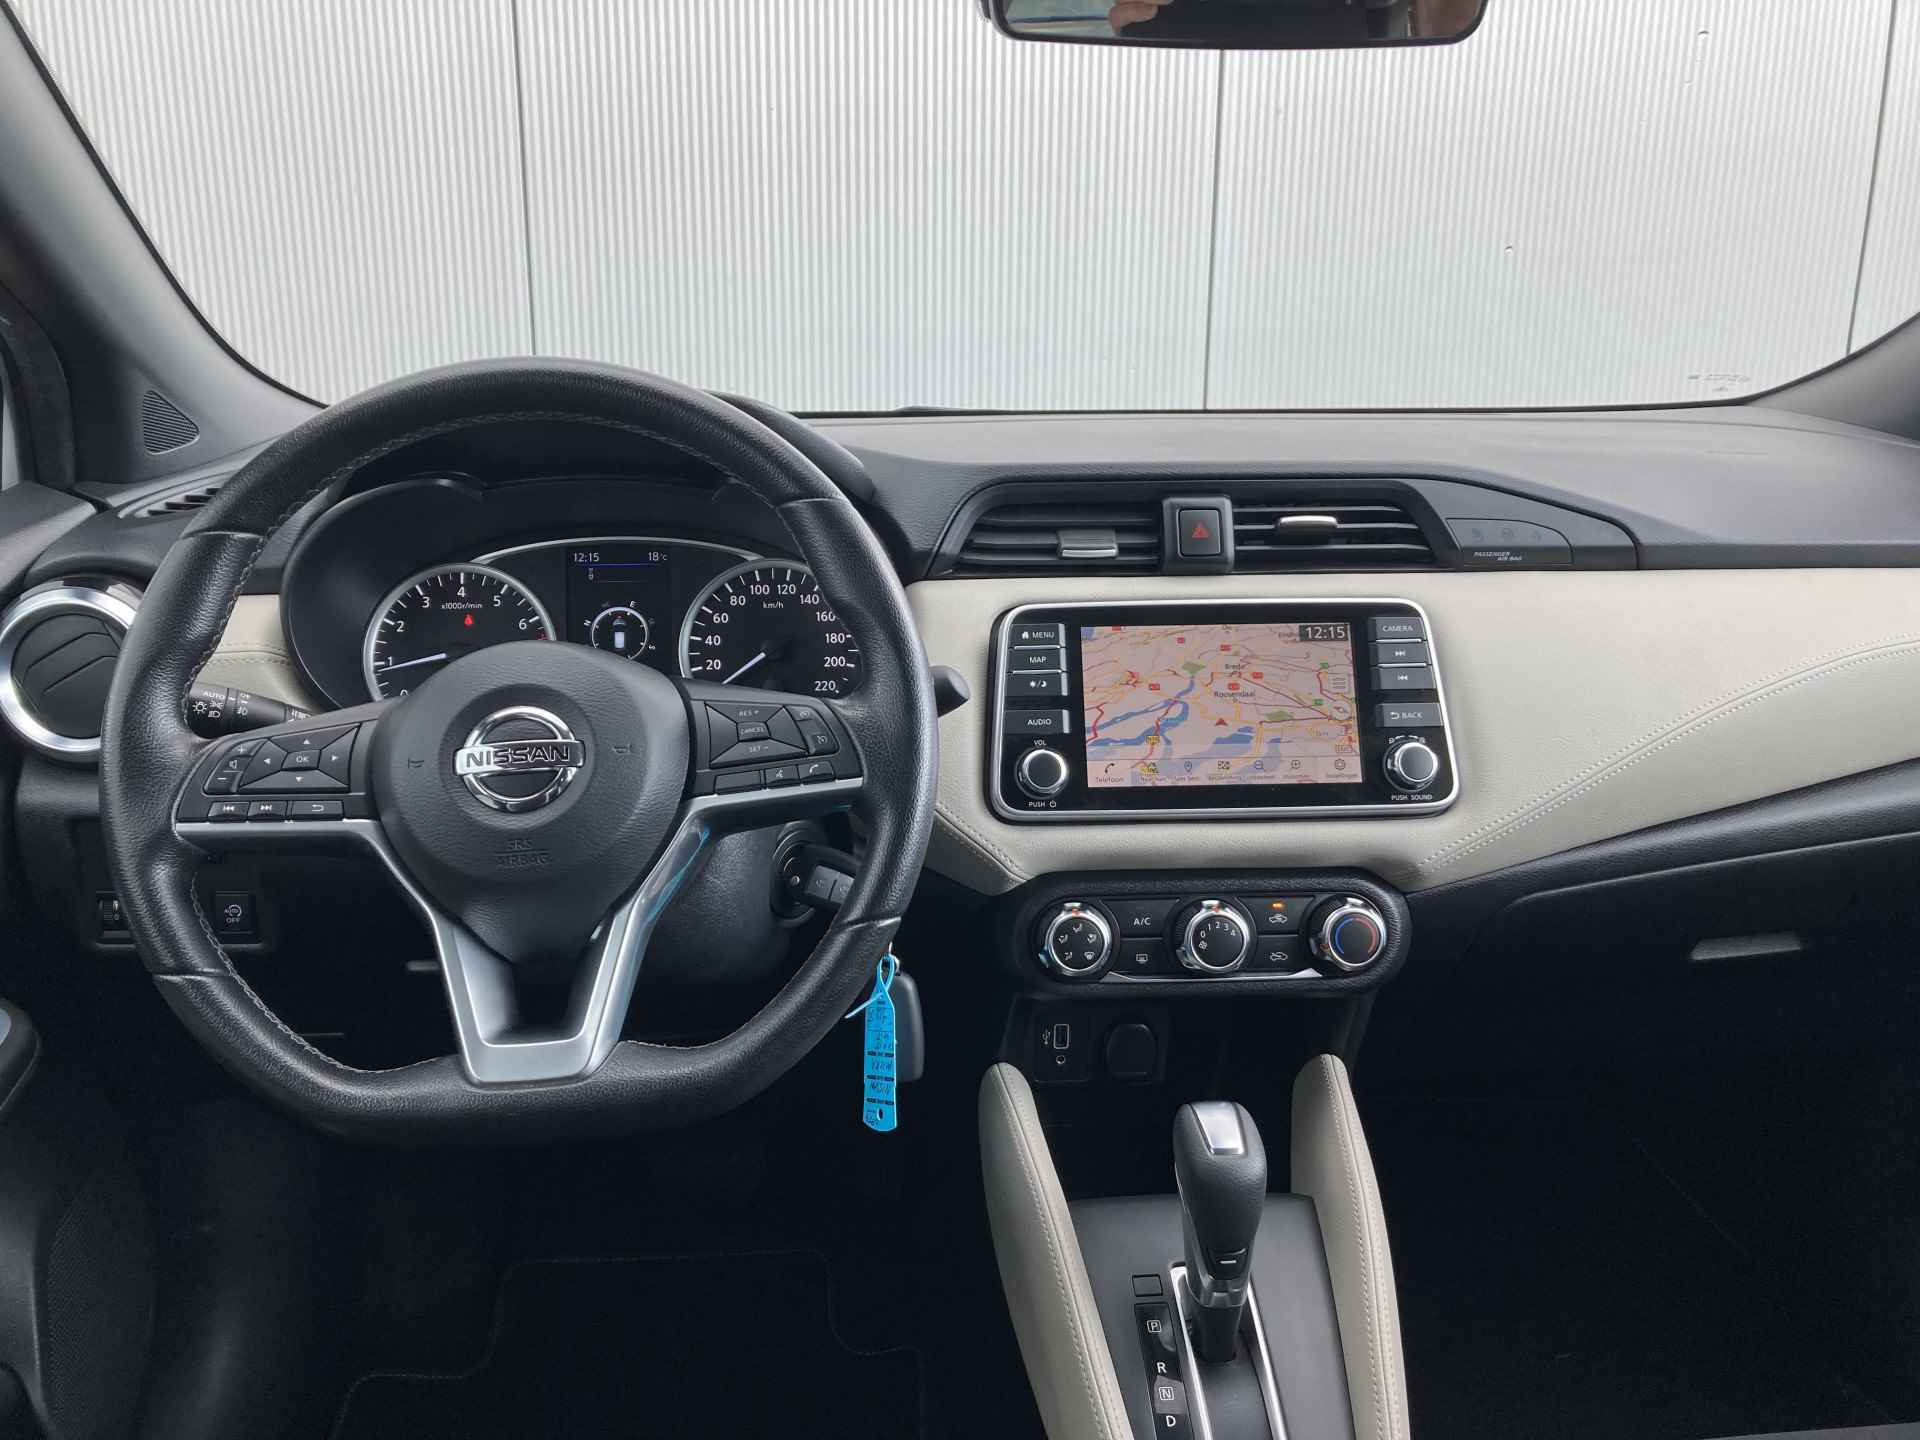 Nissan Micra 1.0 IG-T DCT Automaat N-Connecta Navigatie, Cruise Control, Airco, 16"Lm, Achteruitrijcamera - 8/20